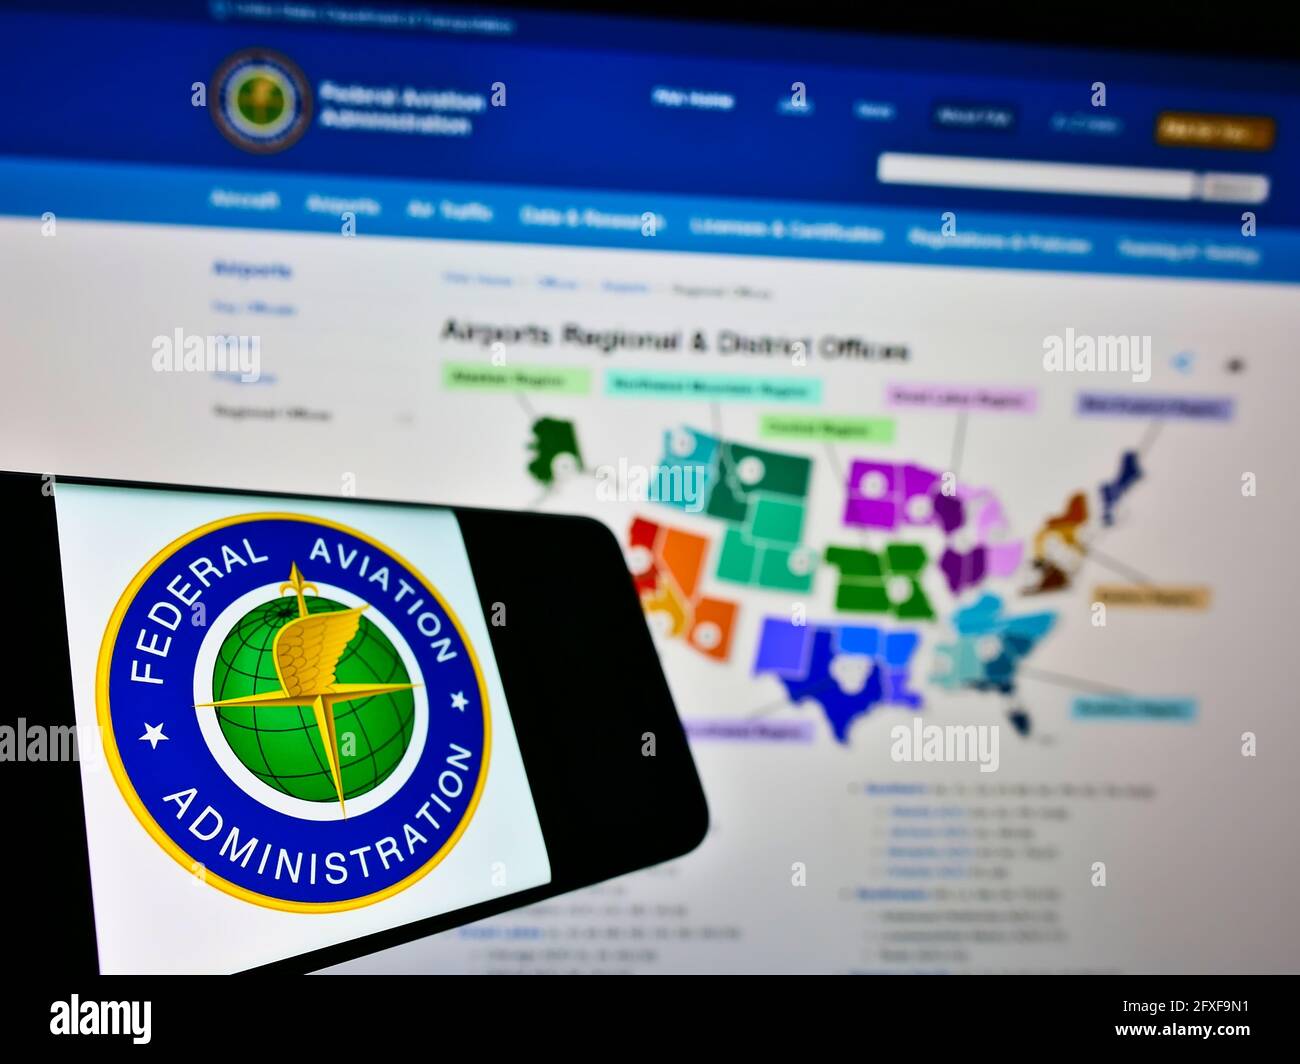 Smartphone with seal of American agency Federal Aviation Administration (FAA) on screen in front of website. Focus on center-left of phone display. Stock Photo